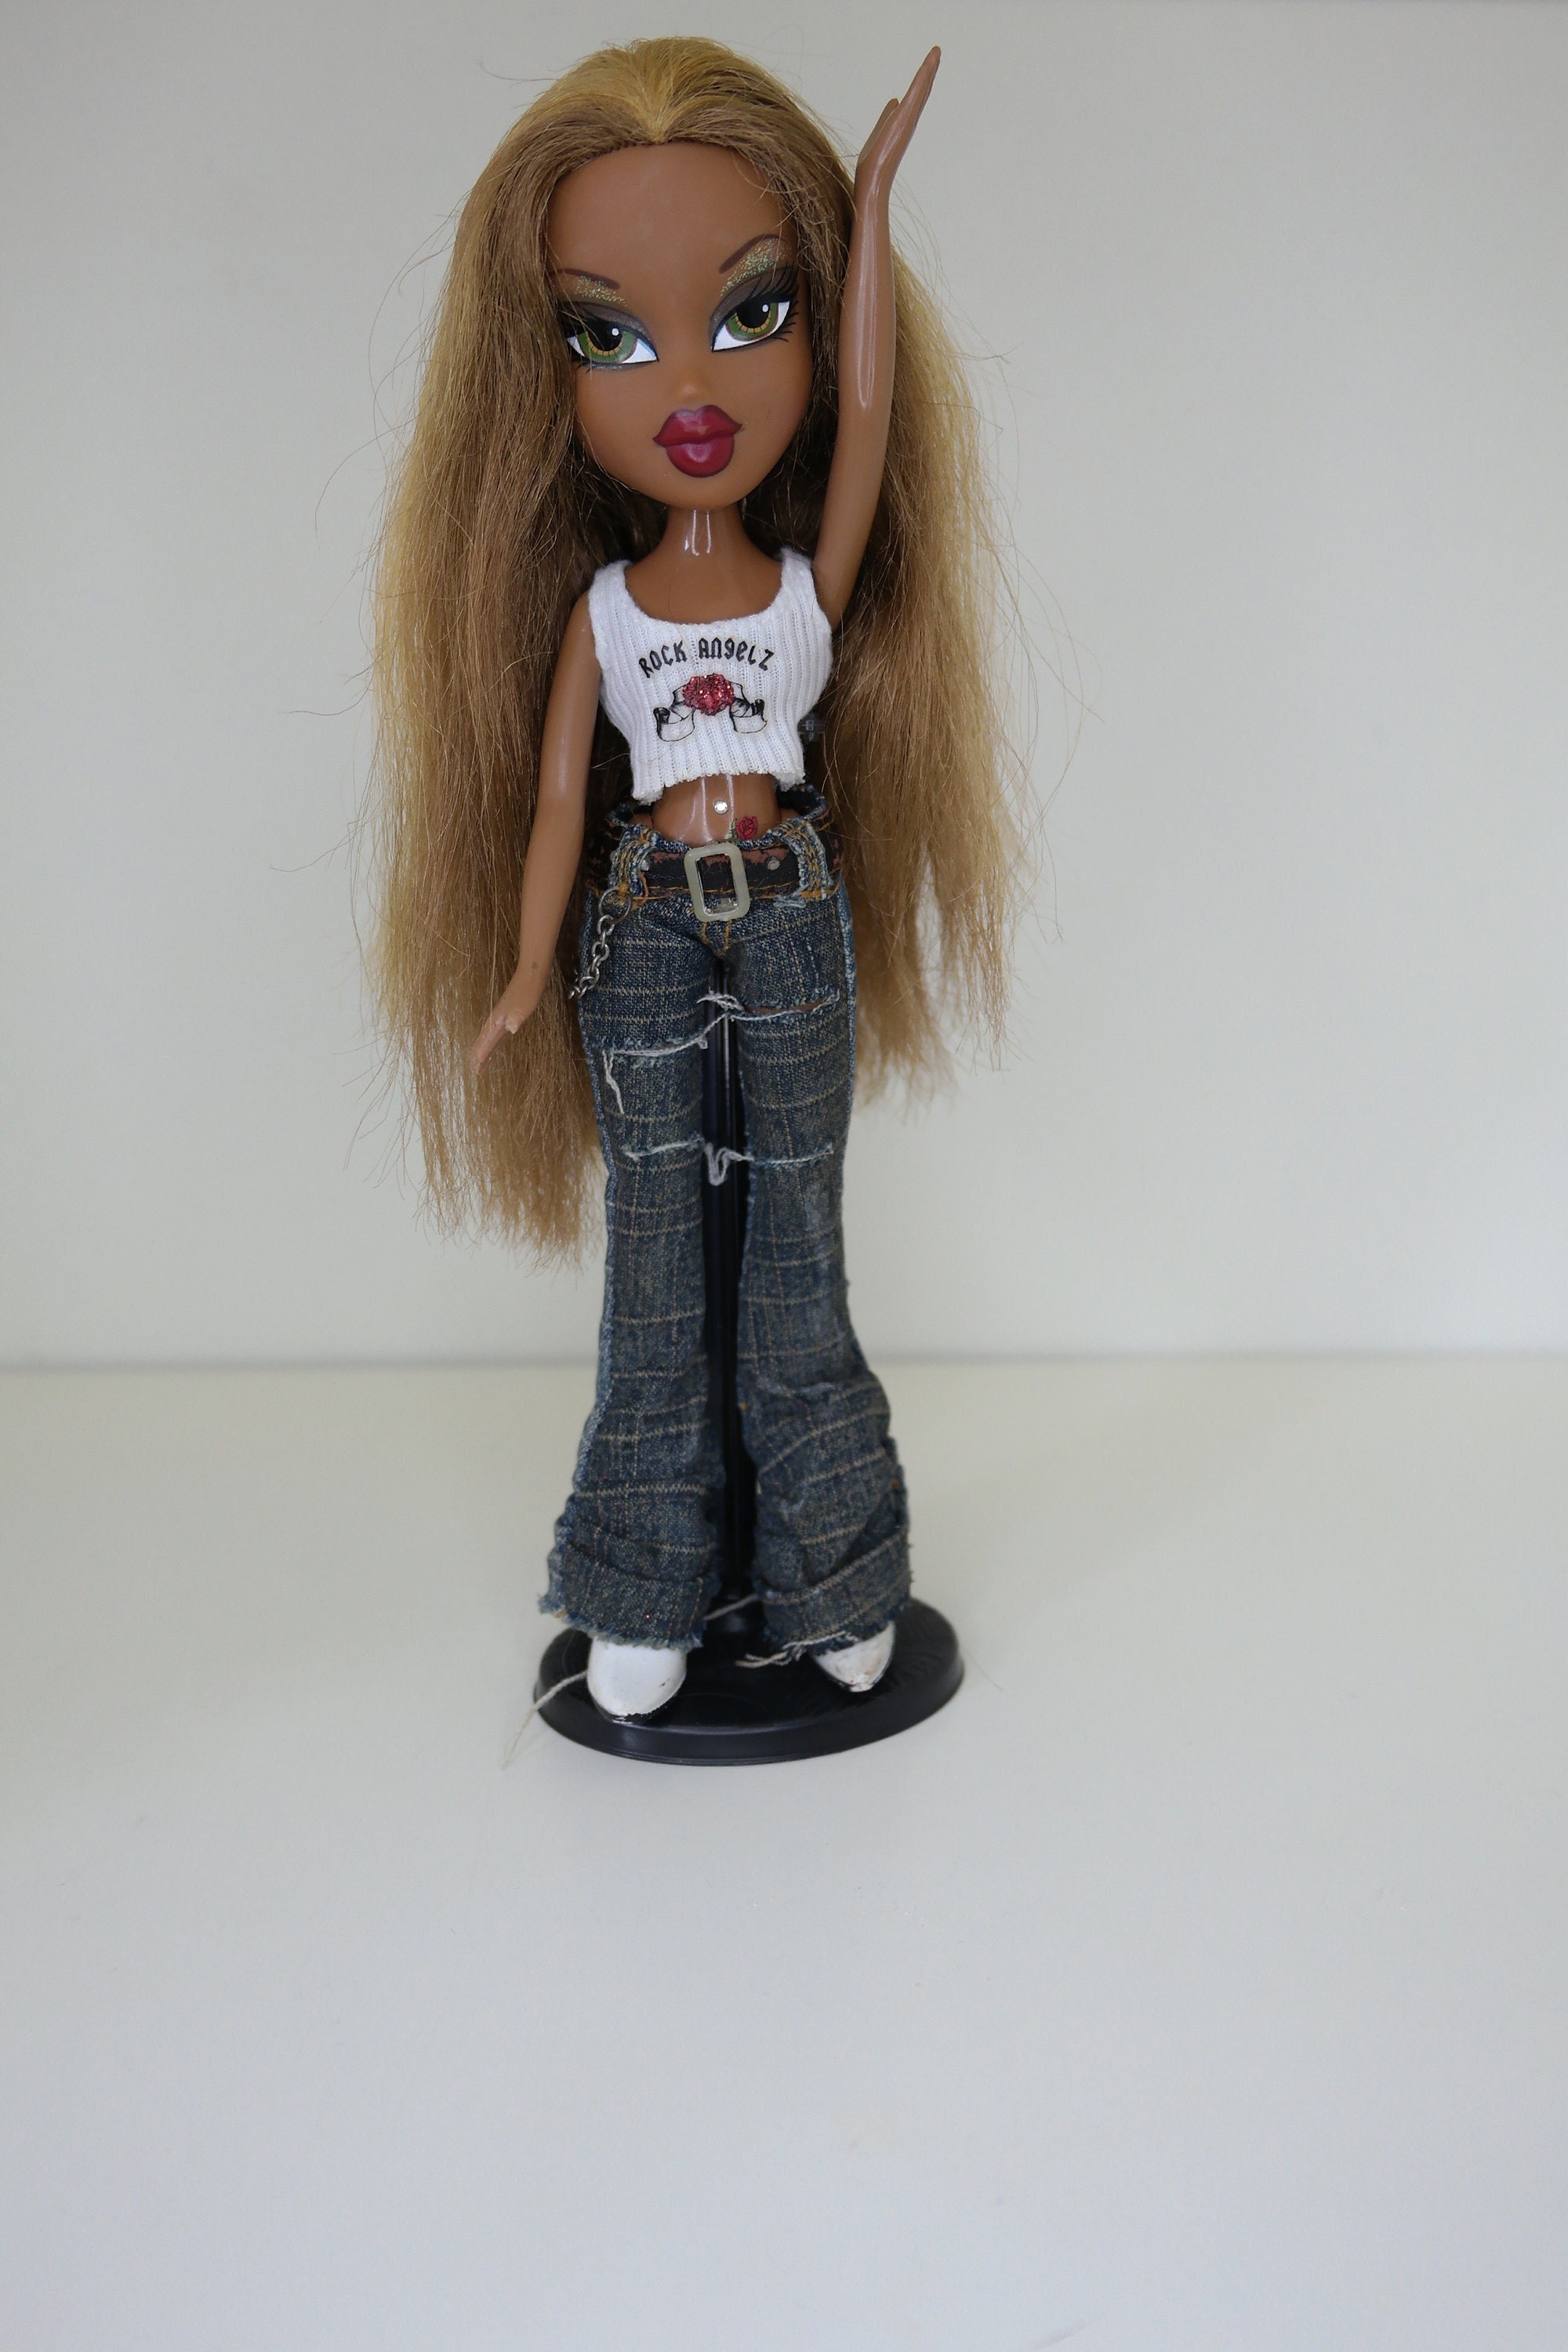 Limited Edition Bratz Doll Sasha Rock Angelz Authentic MGA Bratz Sasha With  A Rose Tattoo on Her Stomach Take a Note to Description 